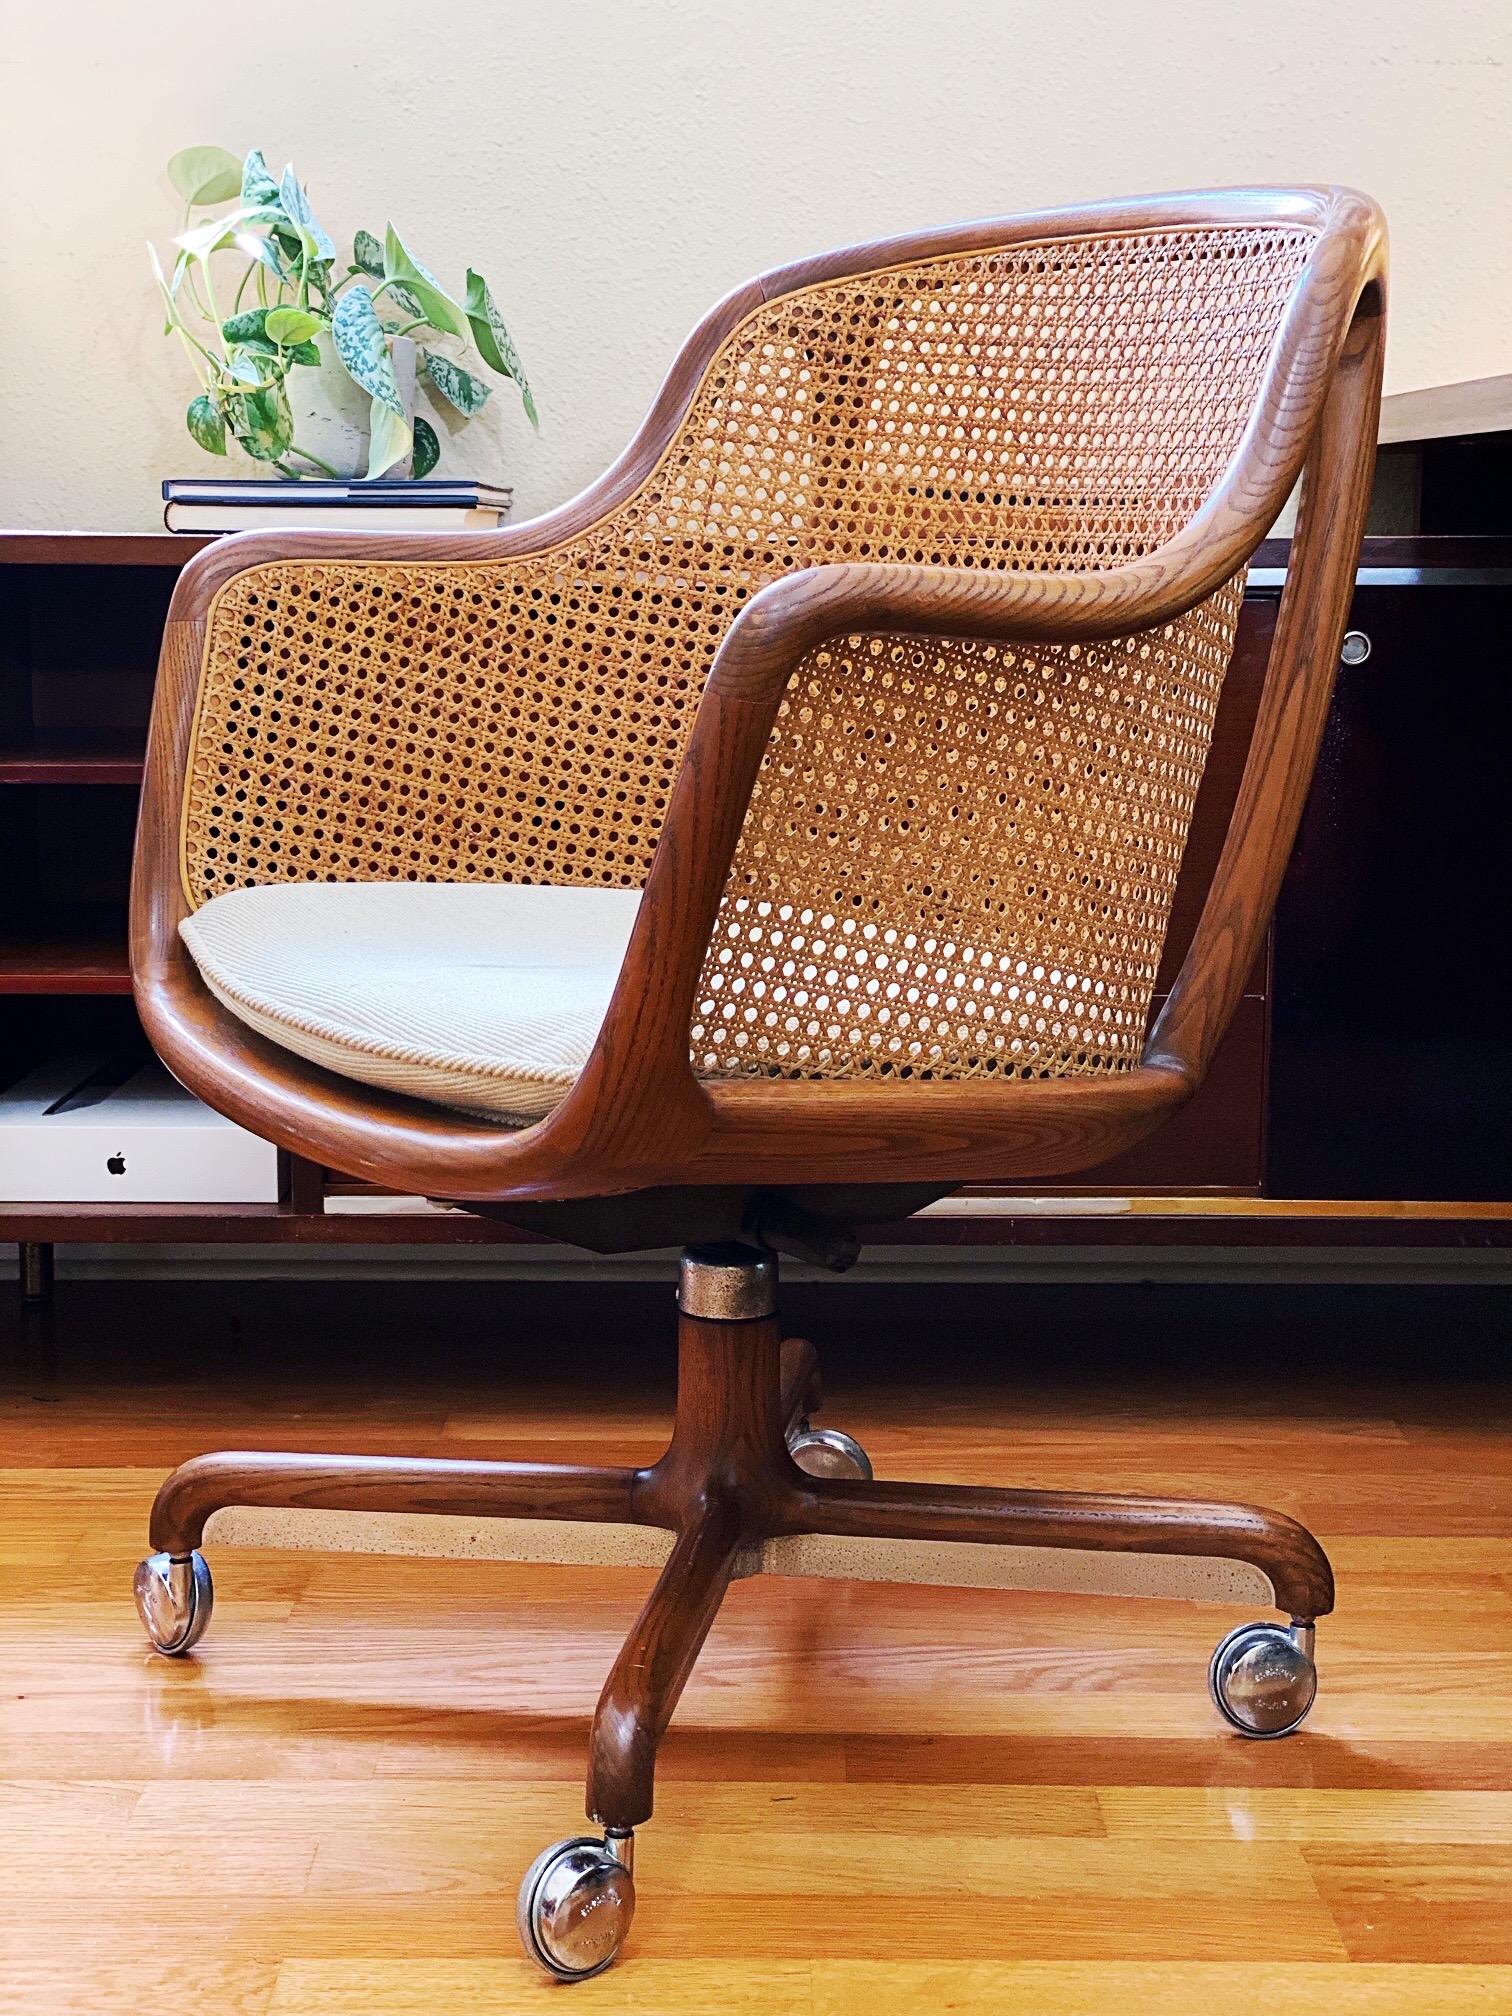 Gorgeous vintage sculptural ash and cane desk chair designed by Ward Bennett for Brickel Associates is in overall excellent condition. The chair swivels 360 degrees, has an adjustable tilt and adjustable seat height between 17-22